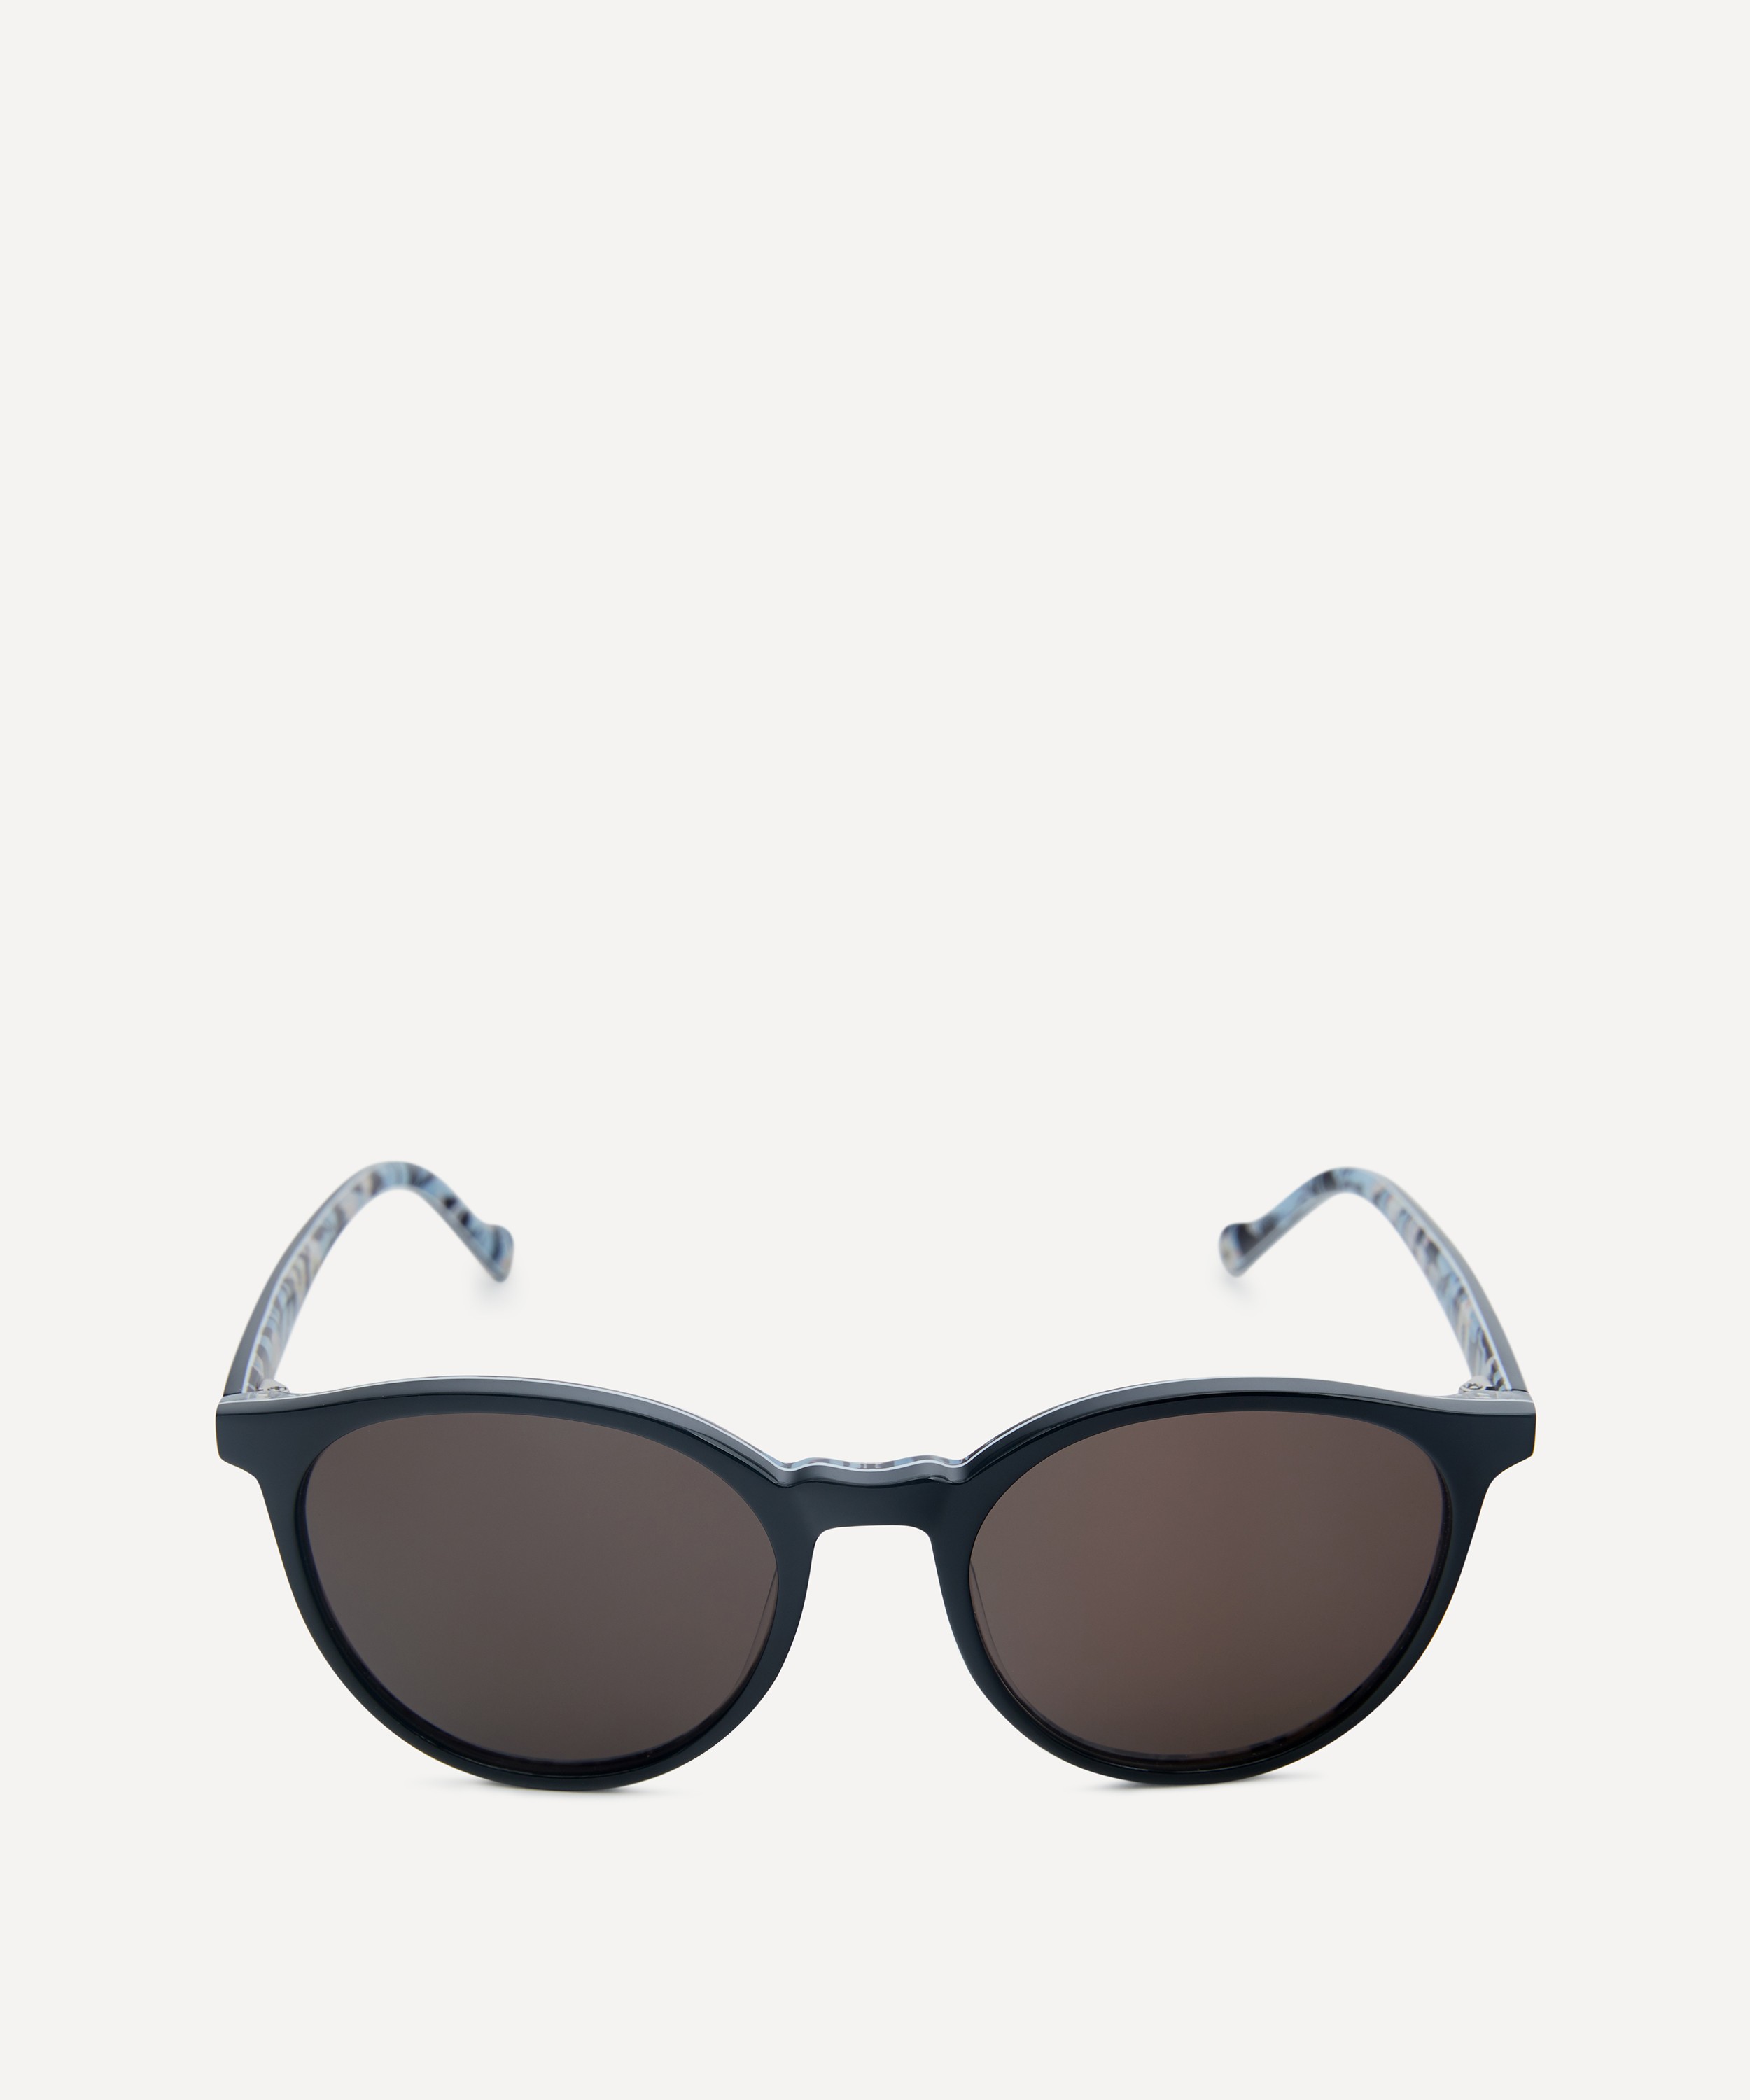 Liberty - Black With Print Round Sunglasses image number 0